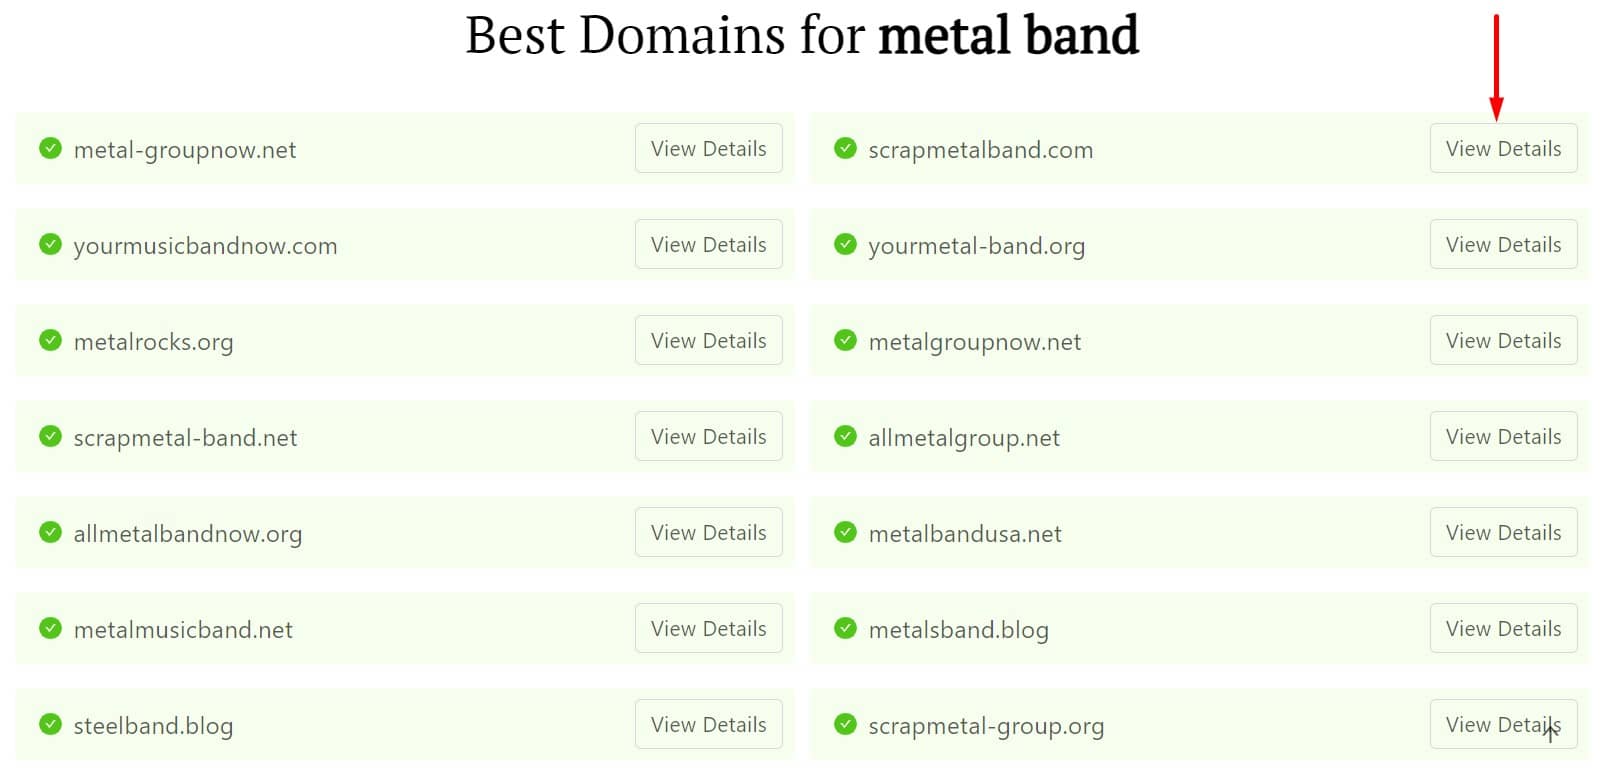 DomainWheel metal band name generator search results with a red arrow pointing to the "View Details" button in the top right result